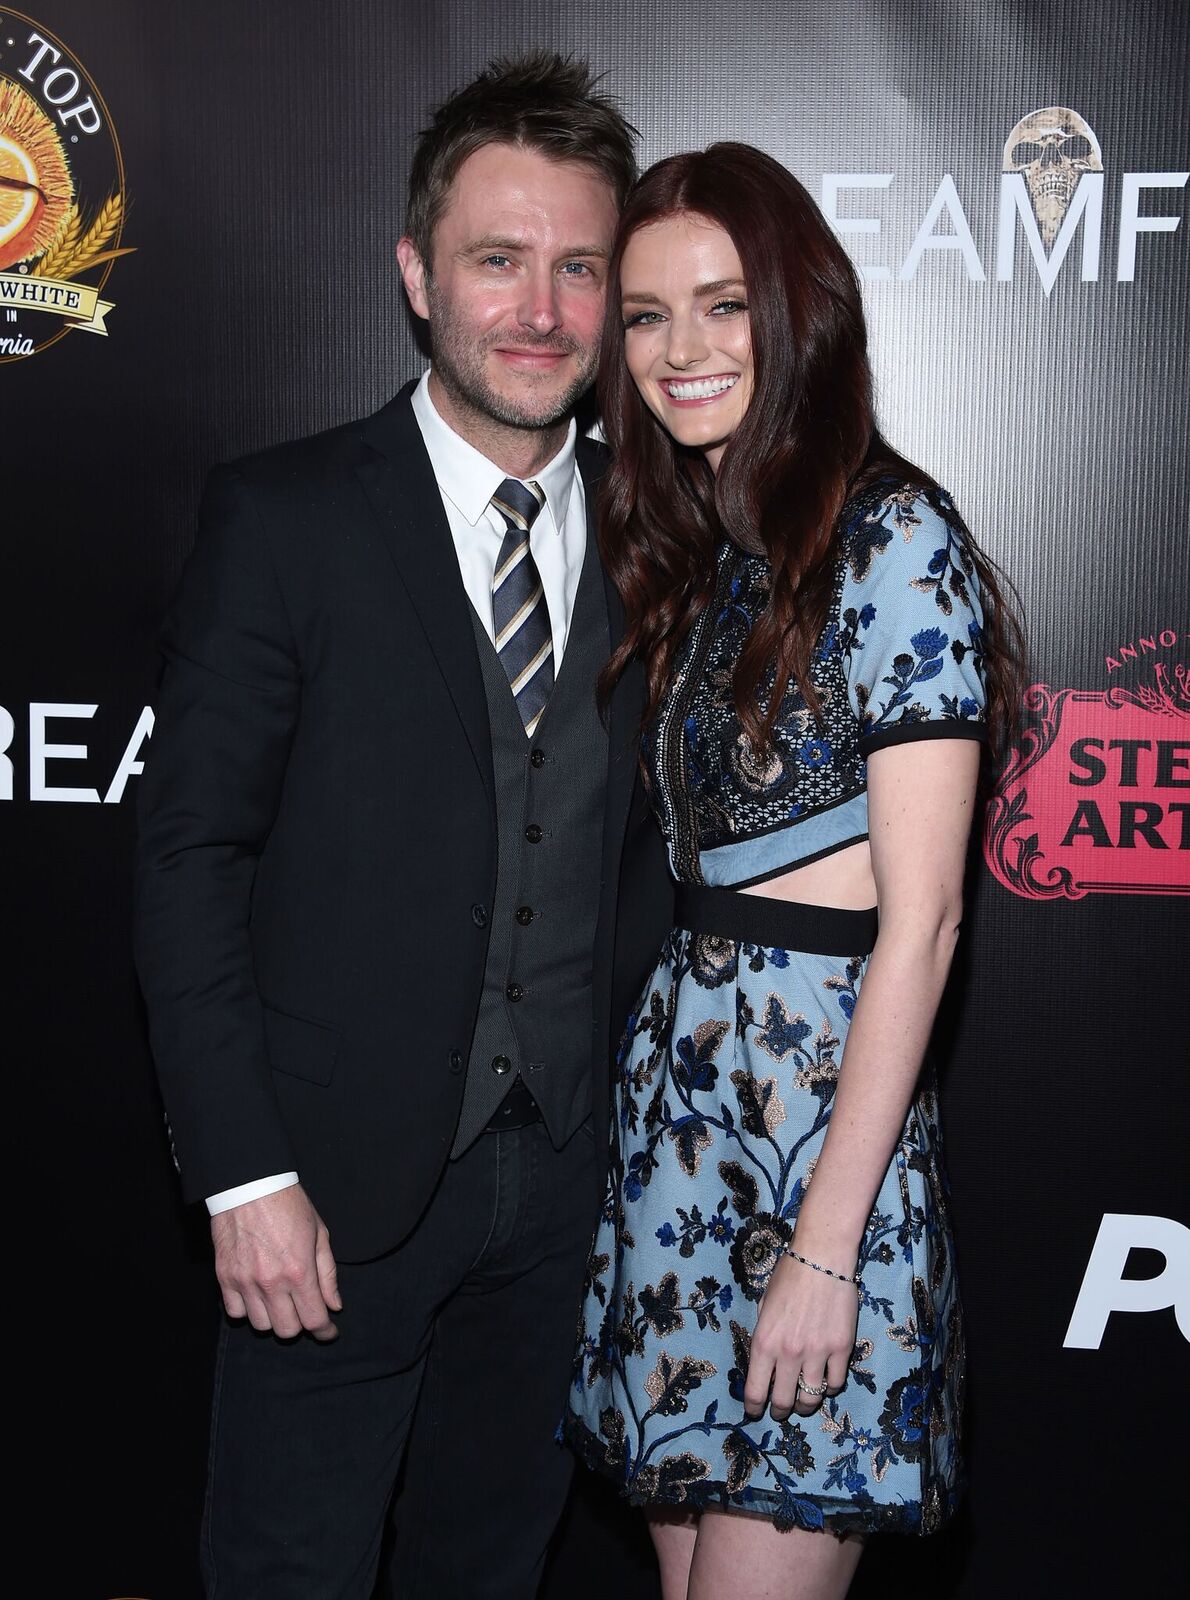  (L-R) -  Chris Hardwick  and  Lydia Hearst  